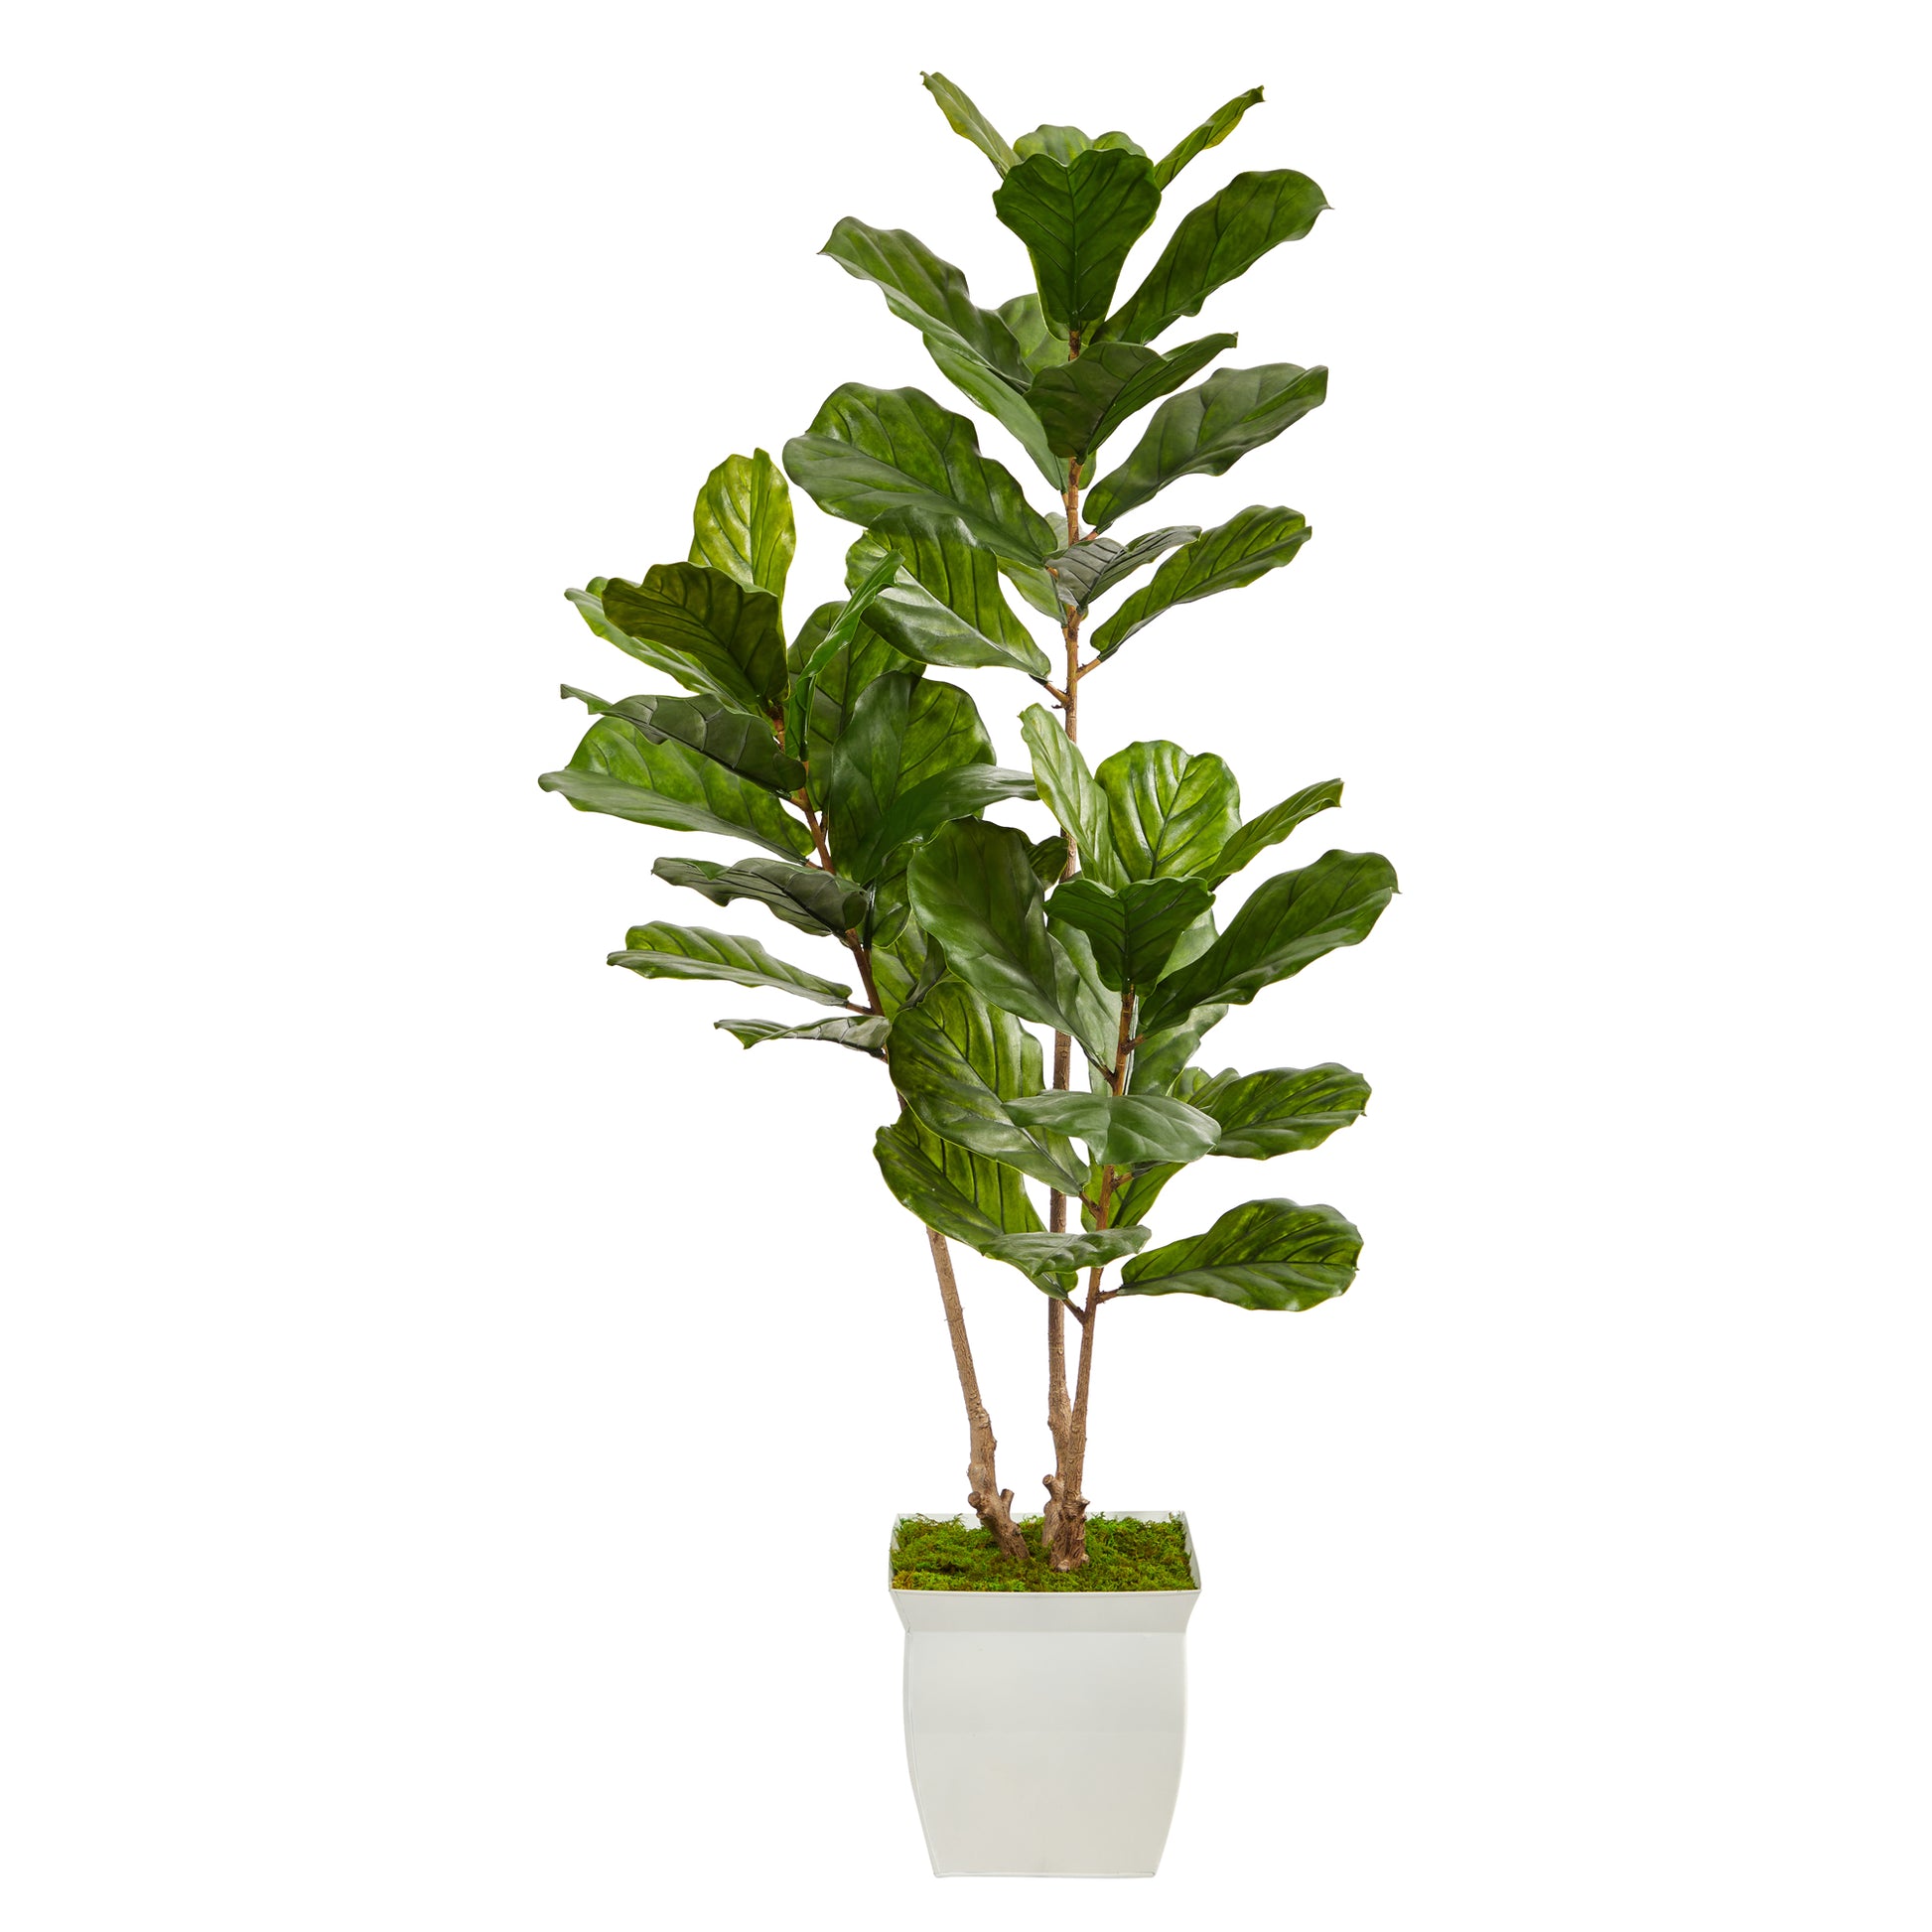 5.5’ Fiddle Leaf Artificial Tree In White Metal Planter UV Resistant (Indoor/Outdoor)